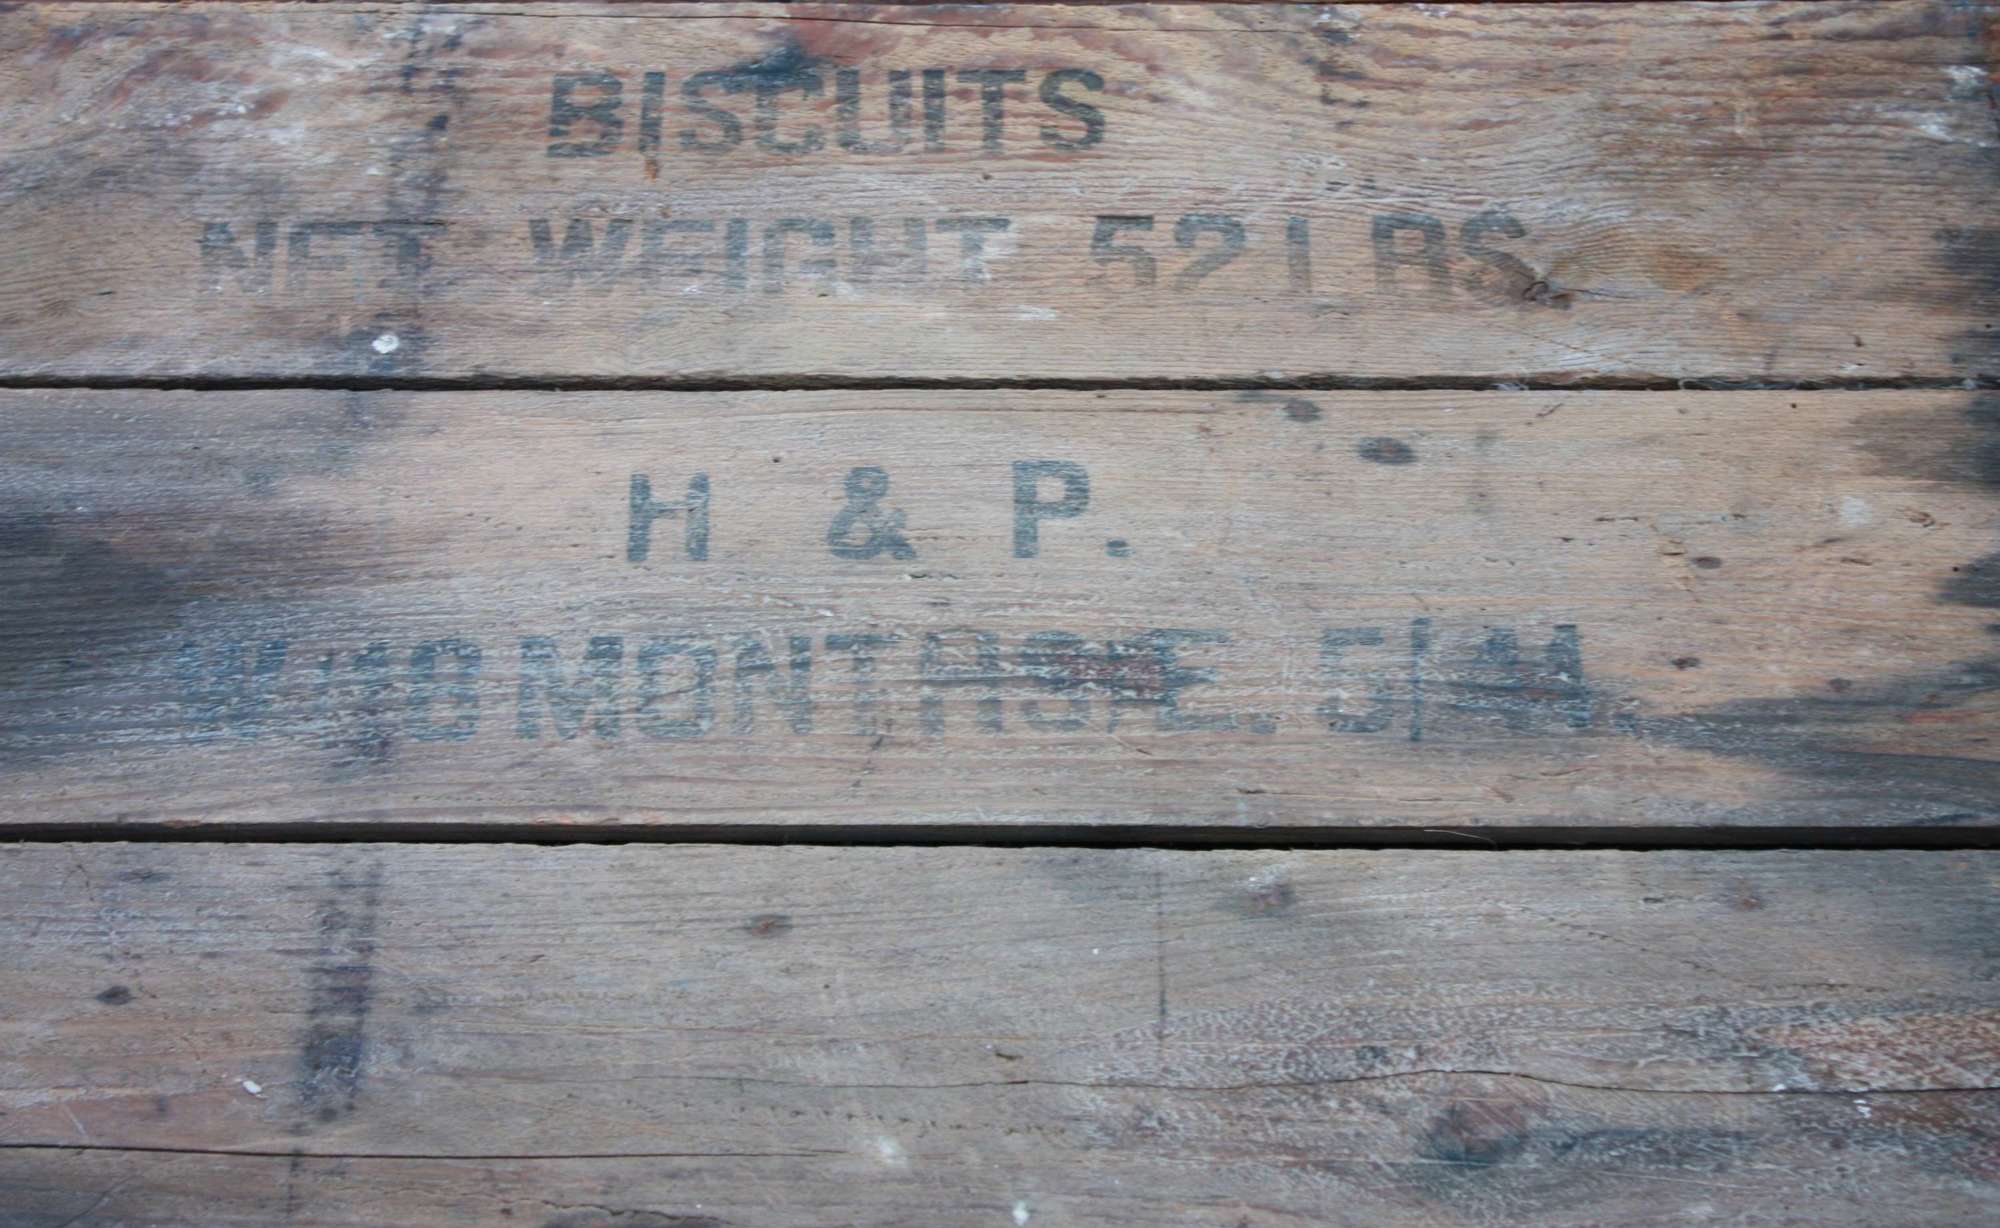 A 1944 DATED LARGE SIZE WOOD BISCUIT CREATE